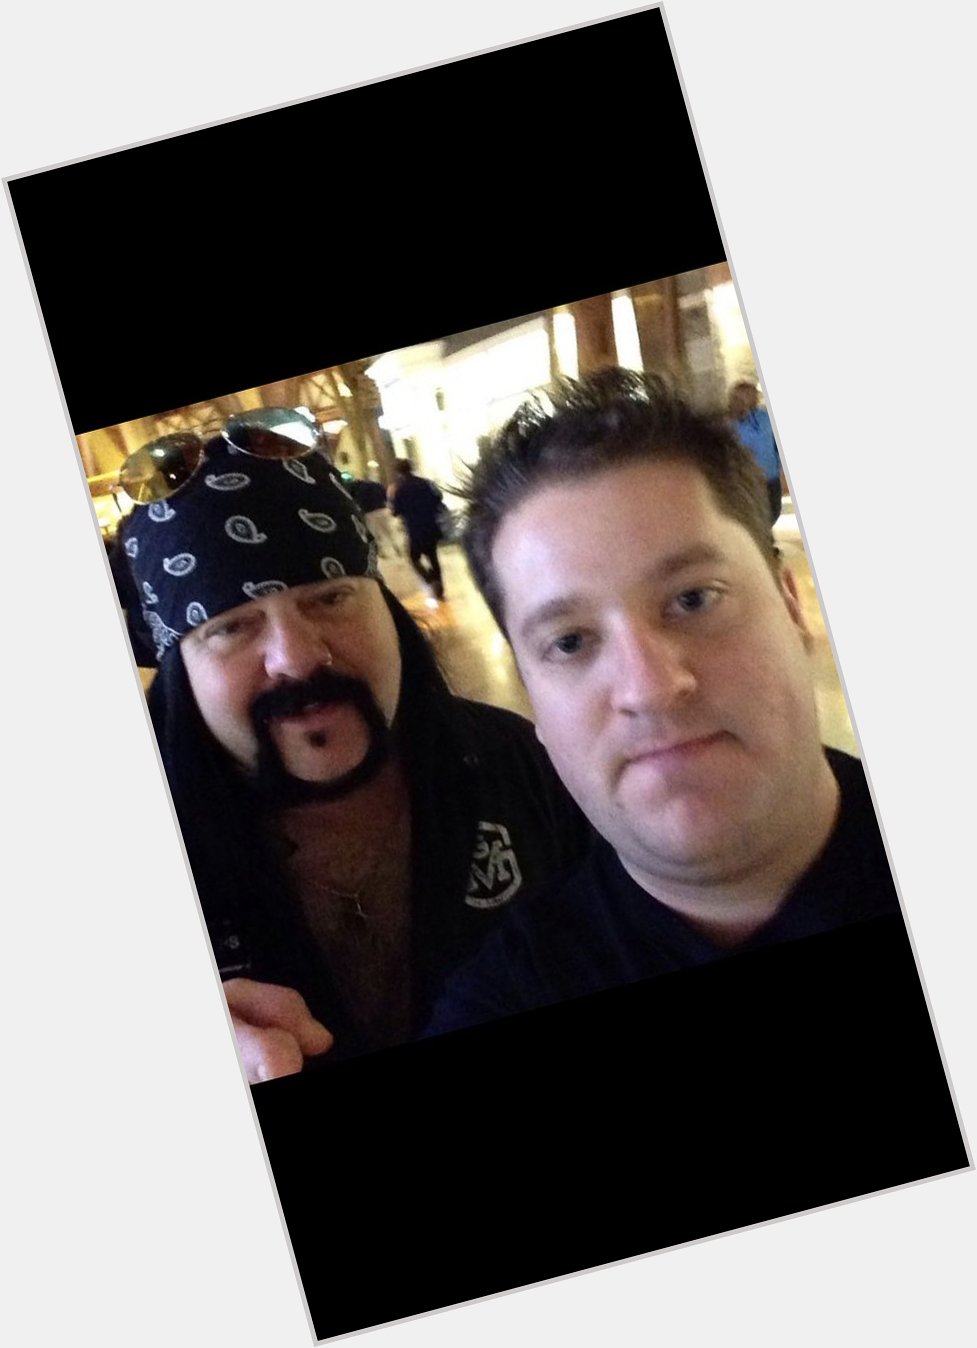 Happy Birthday Vinnie Paul ! We love you and miss you.   